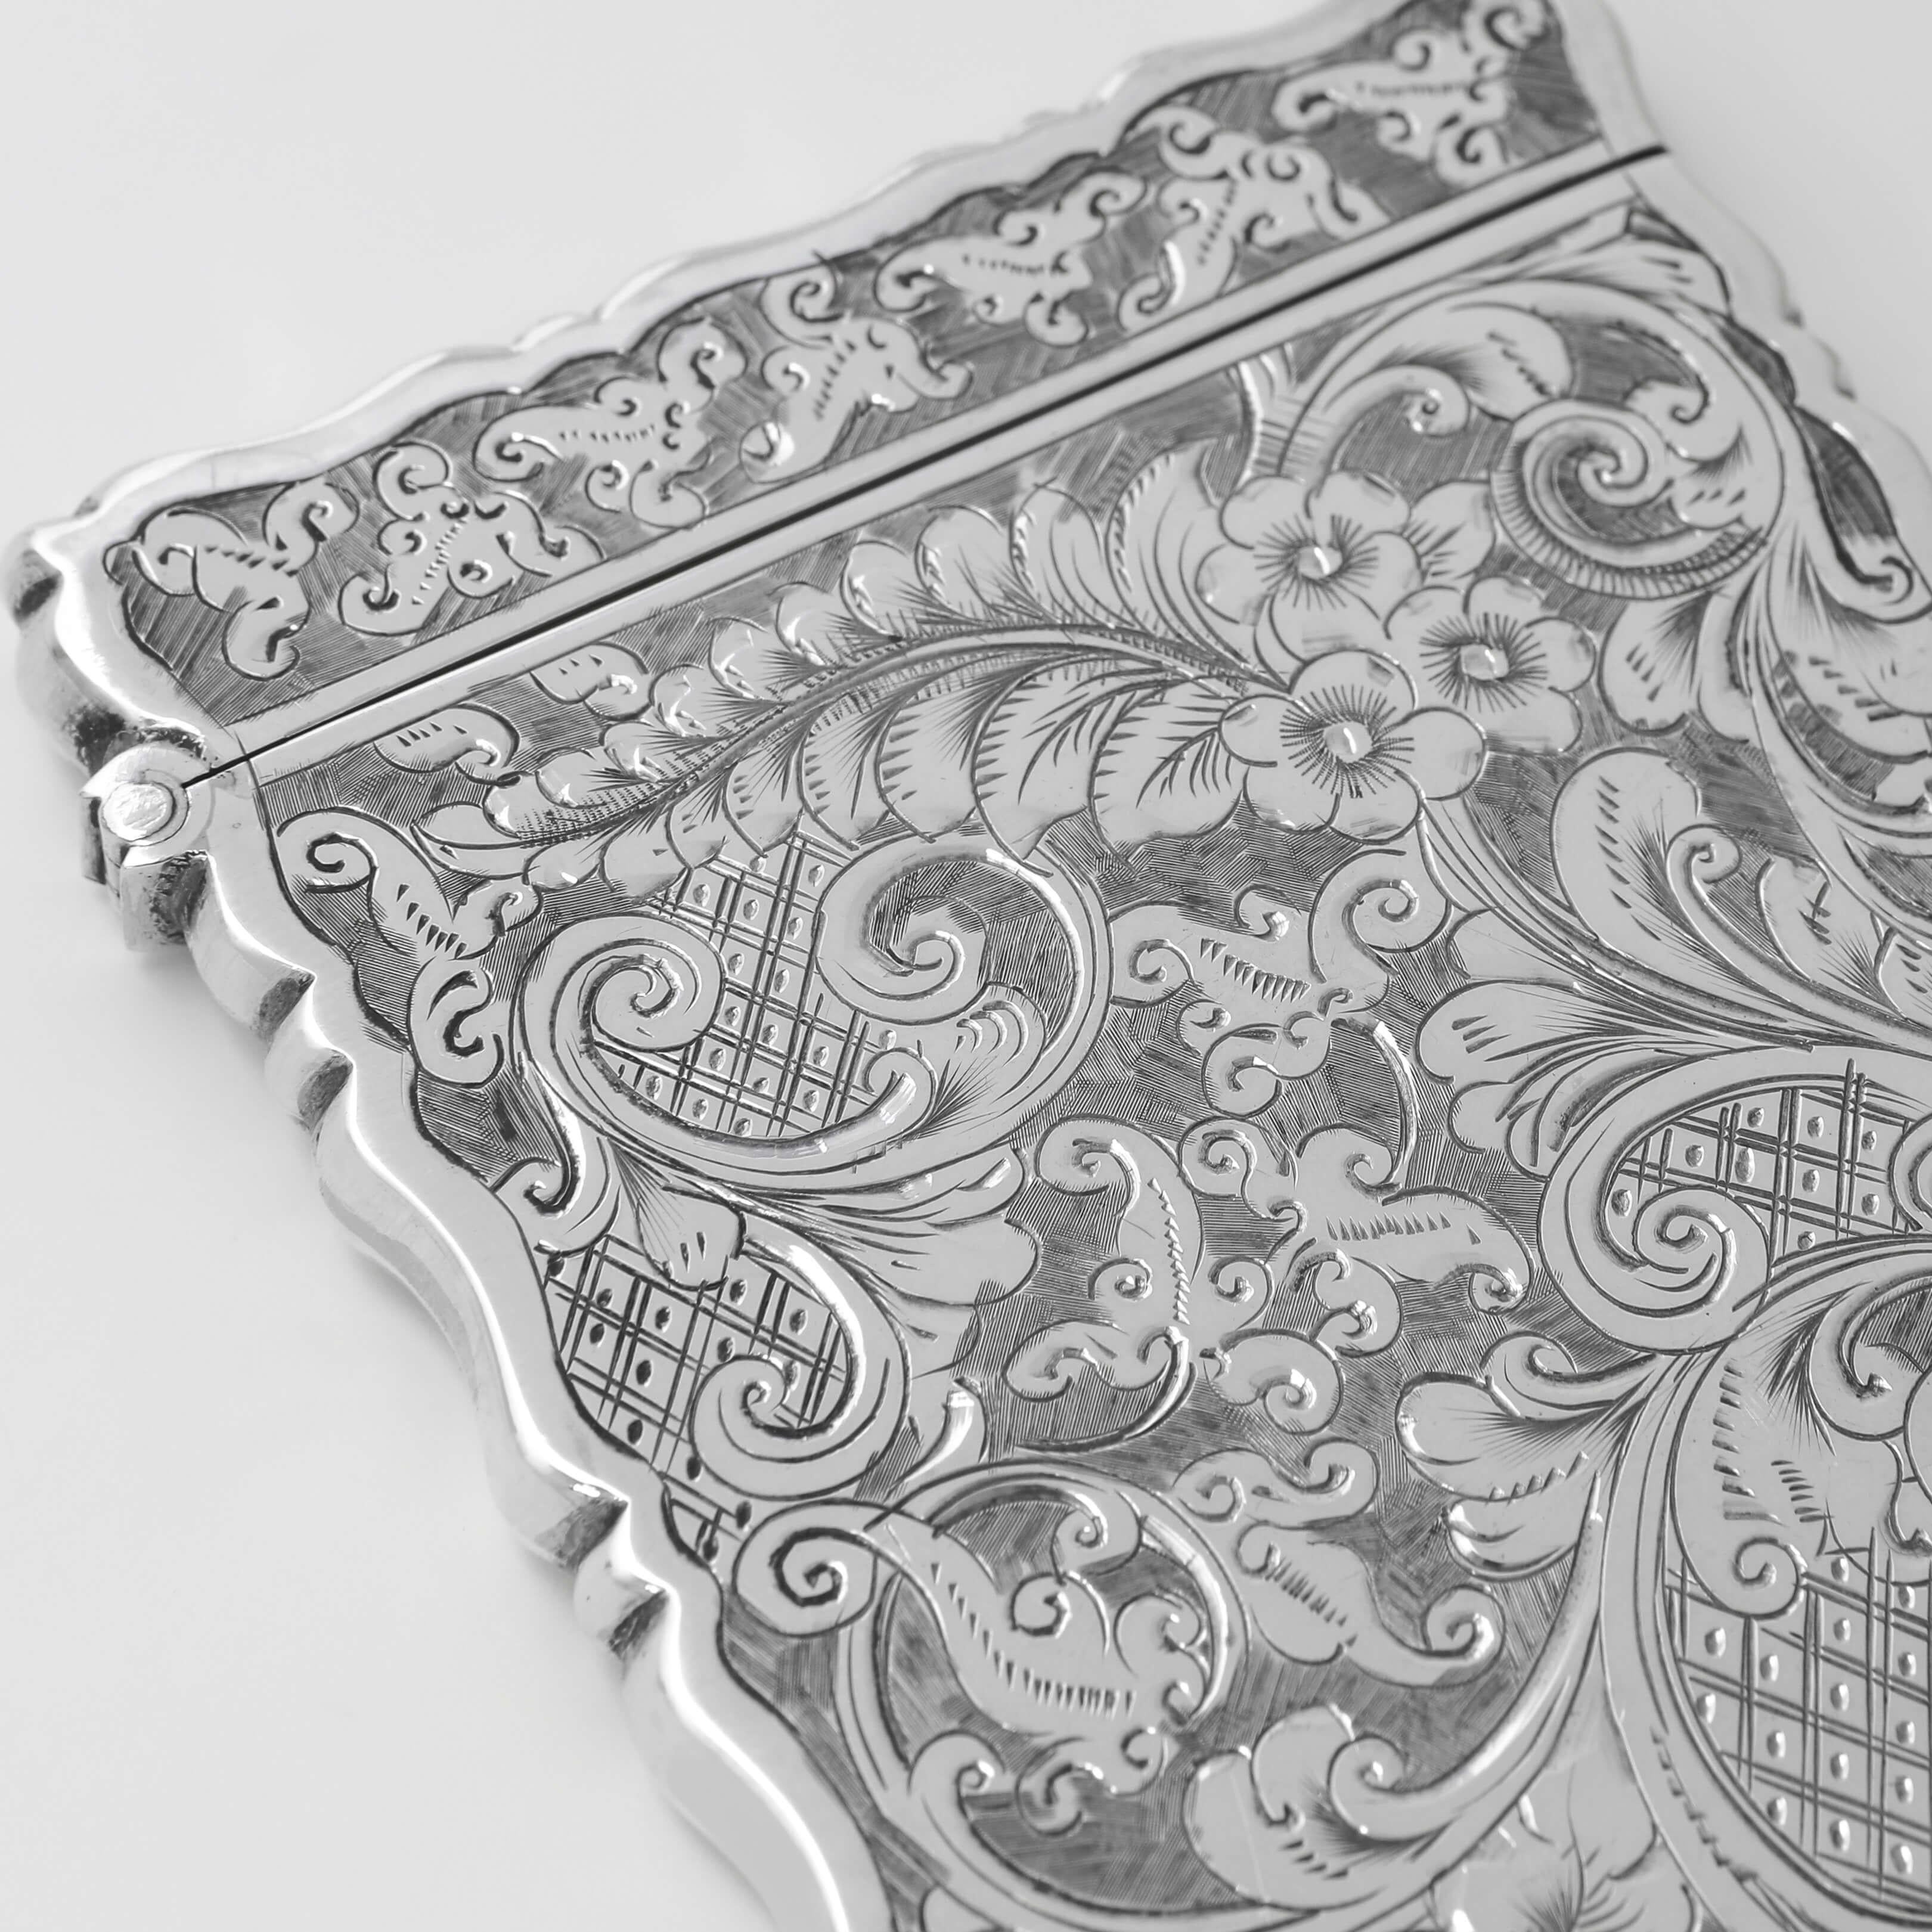 Early 20th Century Edwardian Sterling Silver Card Case - George Unite - 1905 For Sale